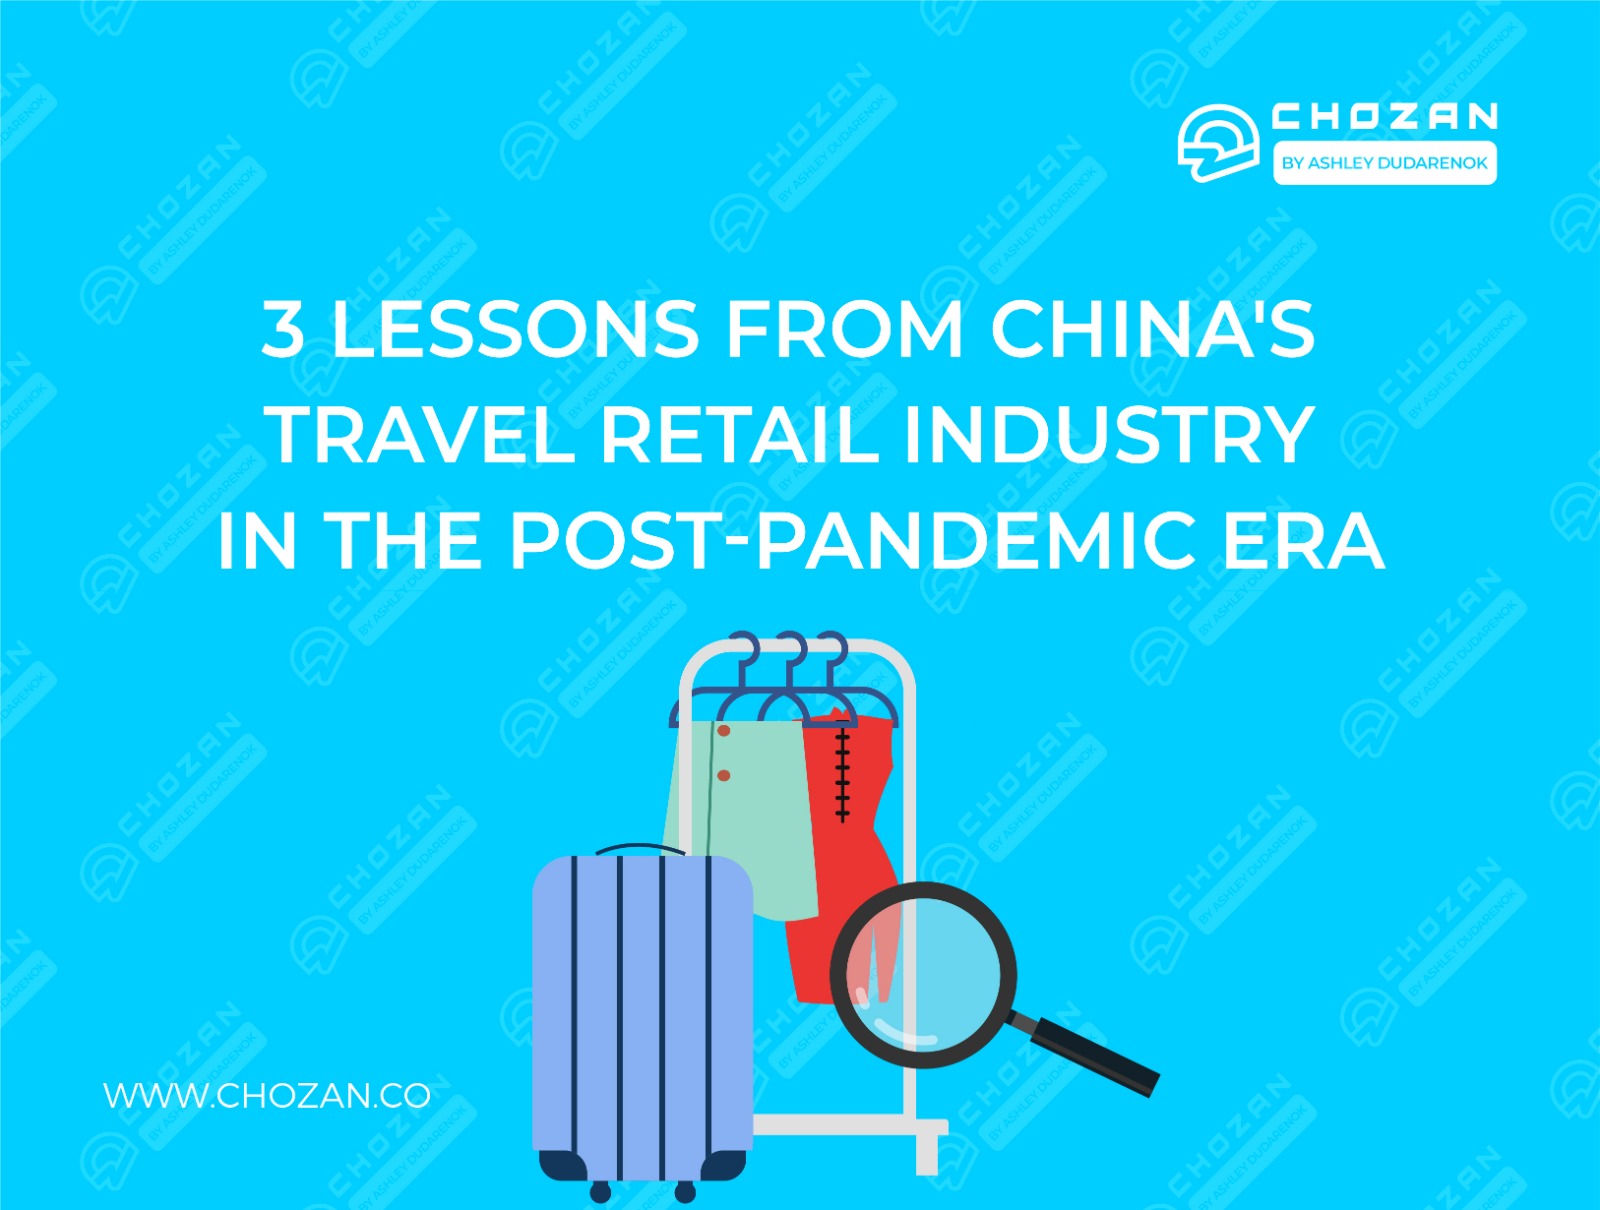 3 Lessons from China’s Travel Retail Industry in the Post-Pandemic Era